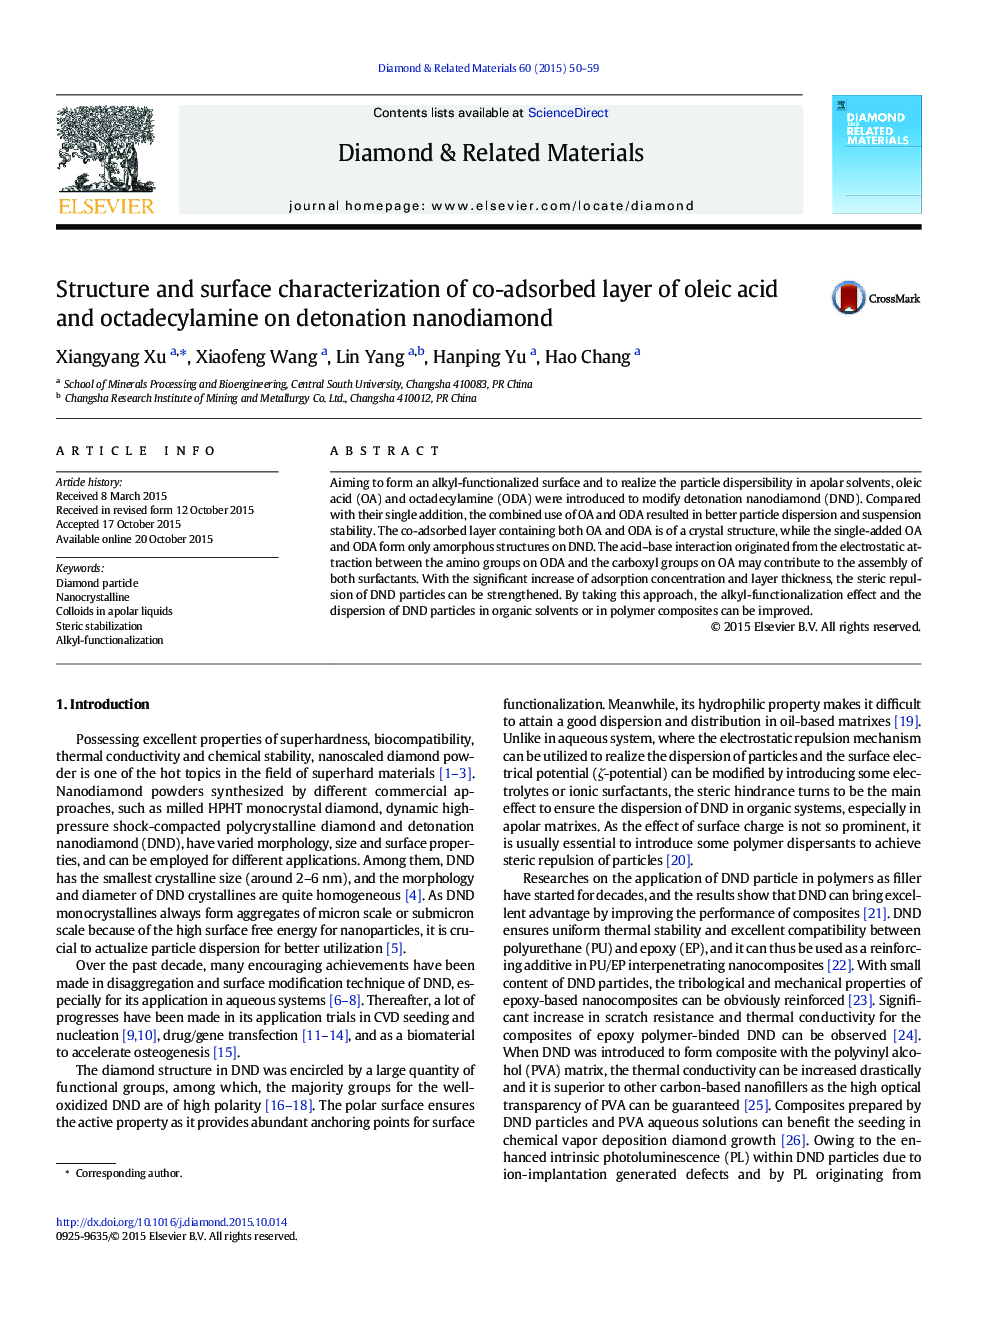 Structure and surface characterization of co-adsorbed layer of oleic acid and octadecylamine on detonation nanodiamond